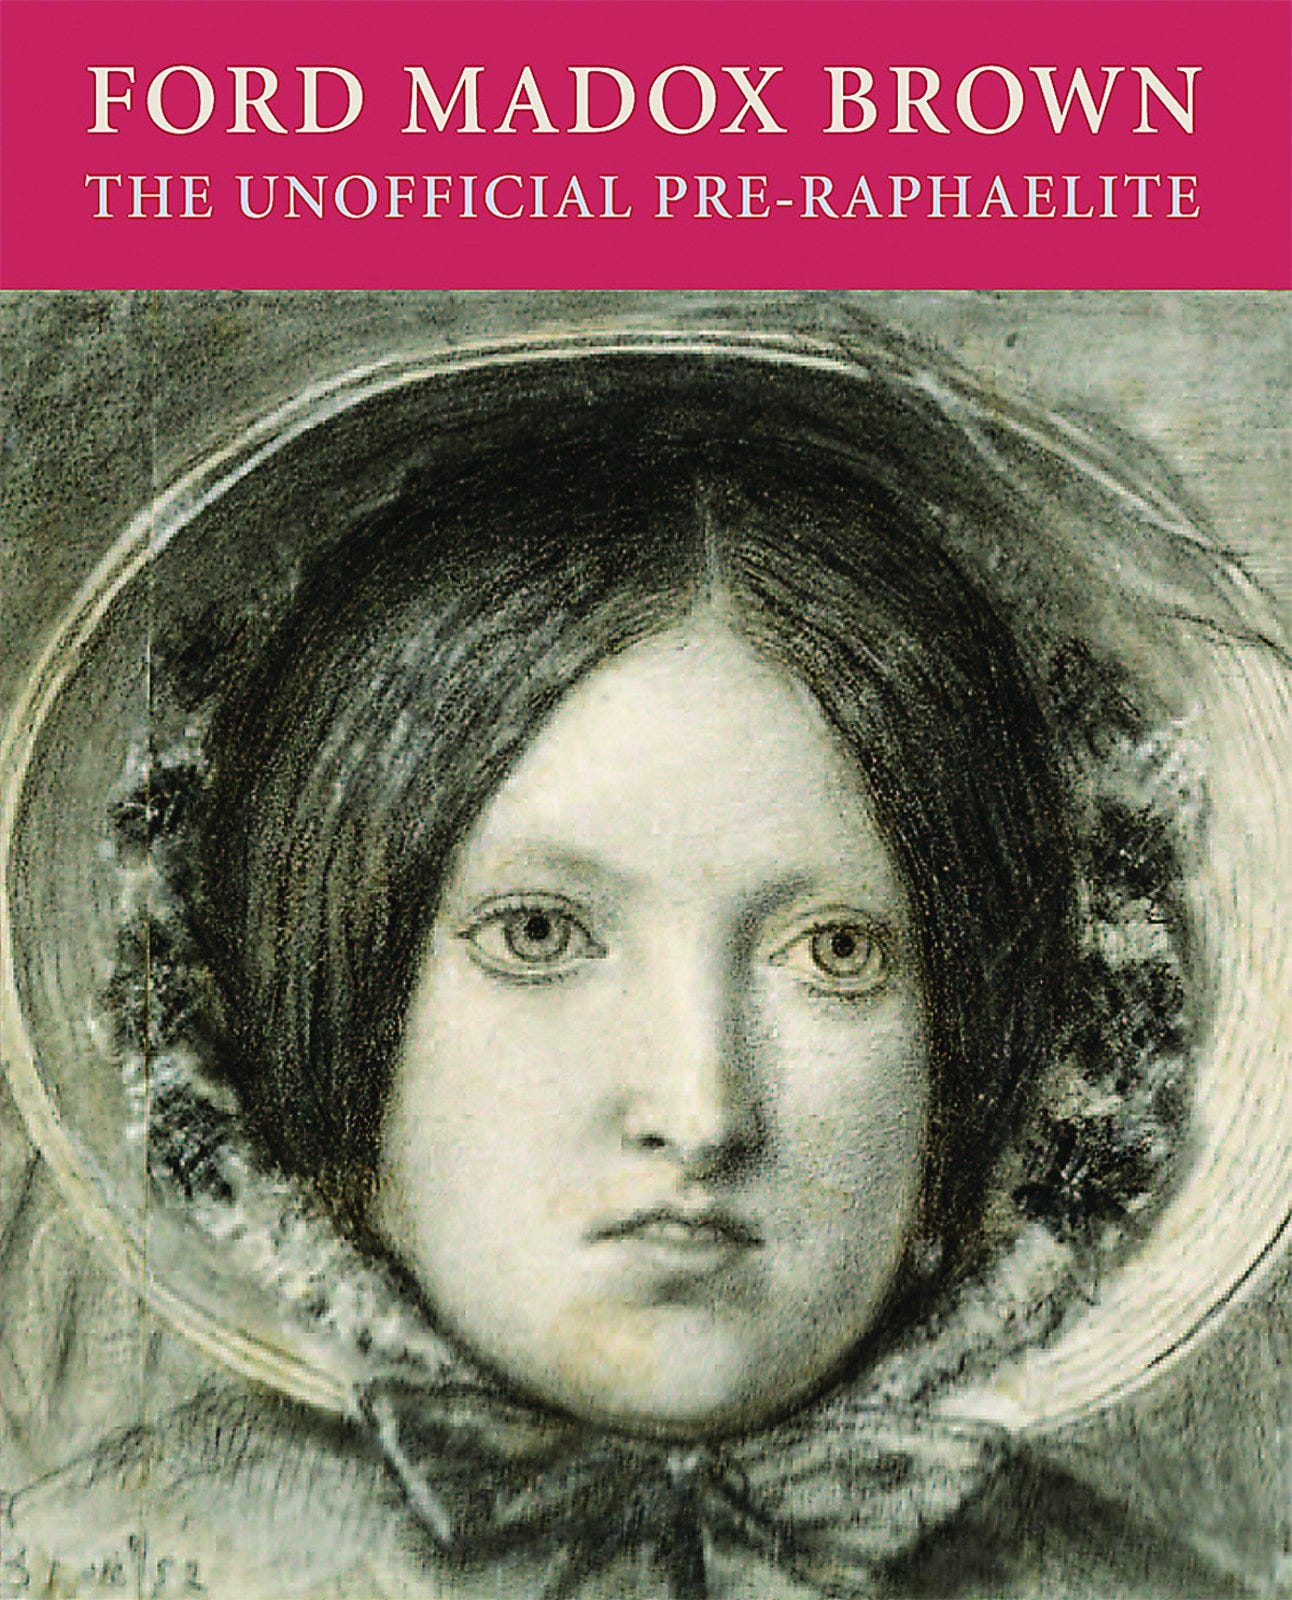 Ford Madox Brown: The Unofficial Pre-Raphaelite: Amazon.co.uk: Angela  Thirlwell, Tim Barringer, Laura MacCulloch: 9781904832560: Books